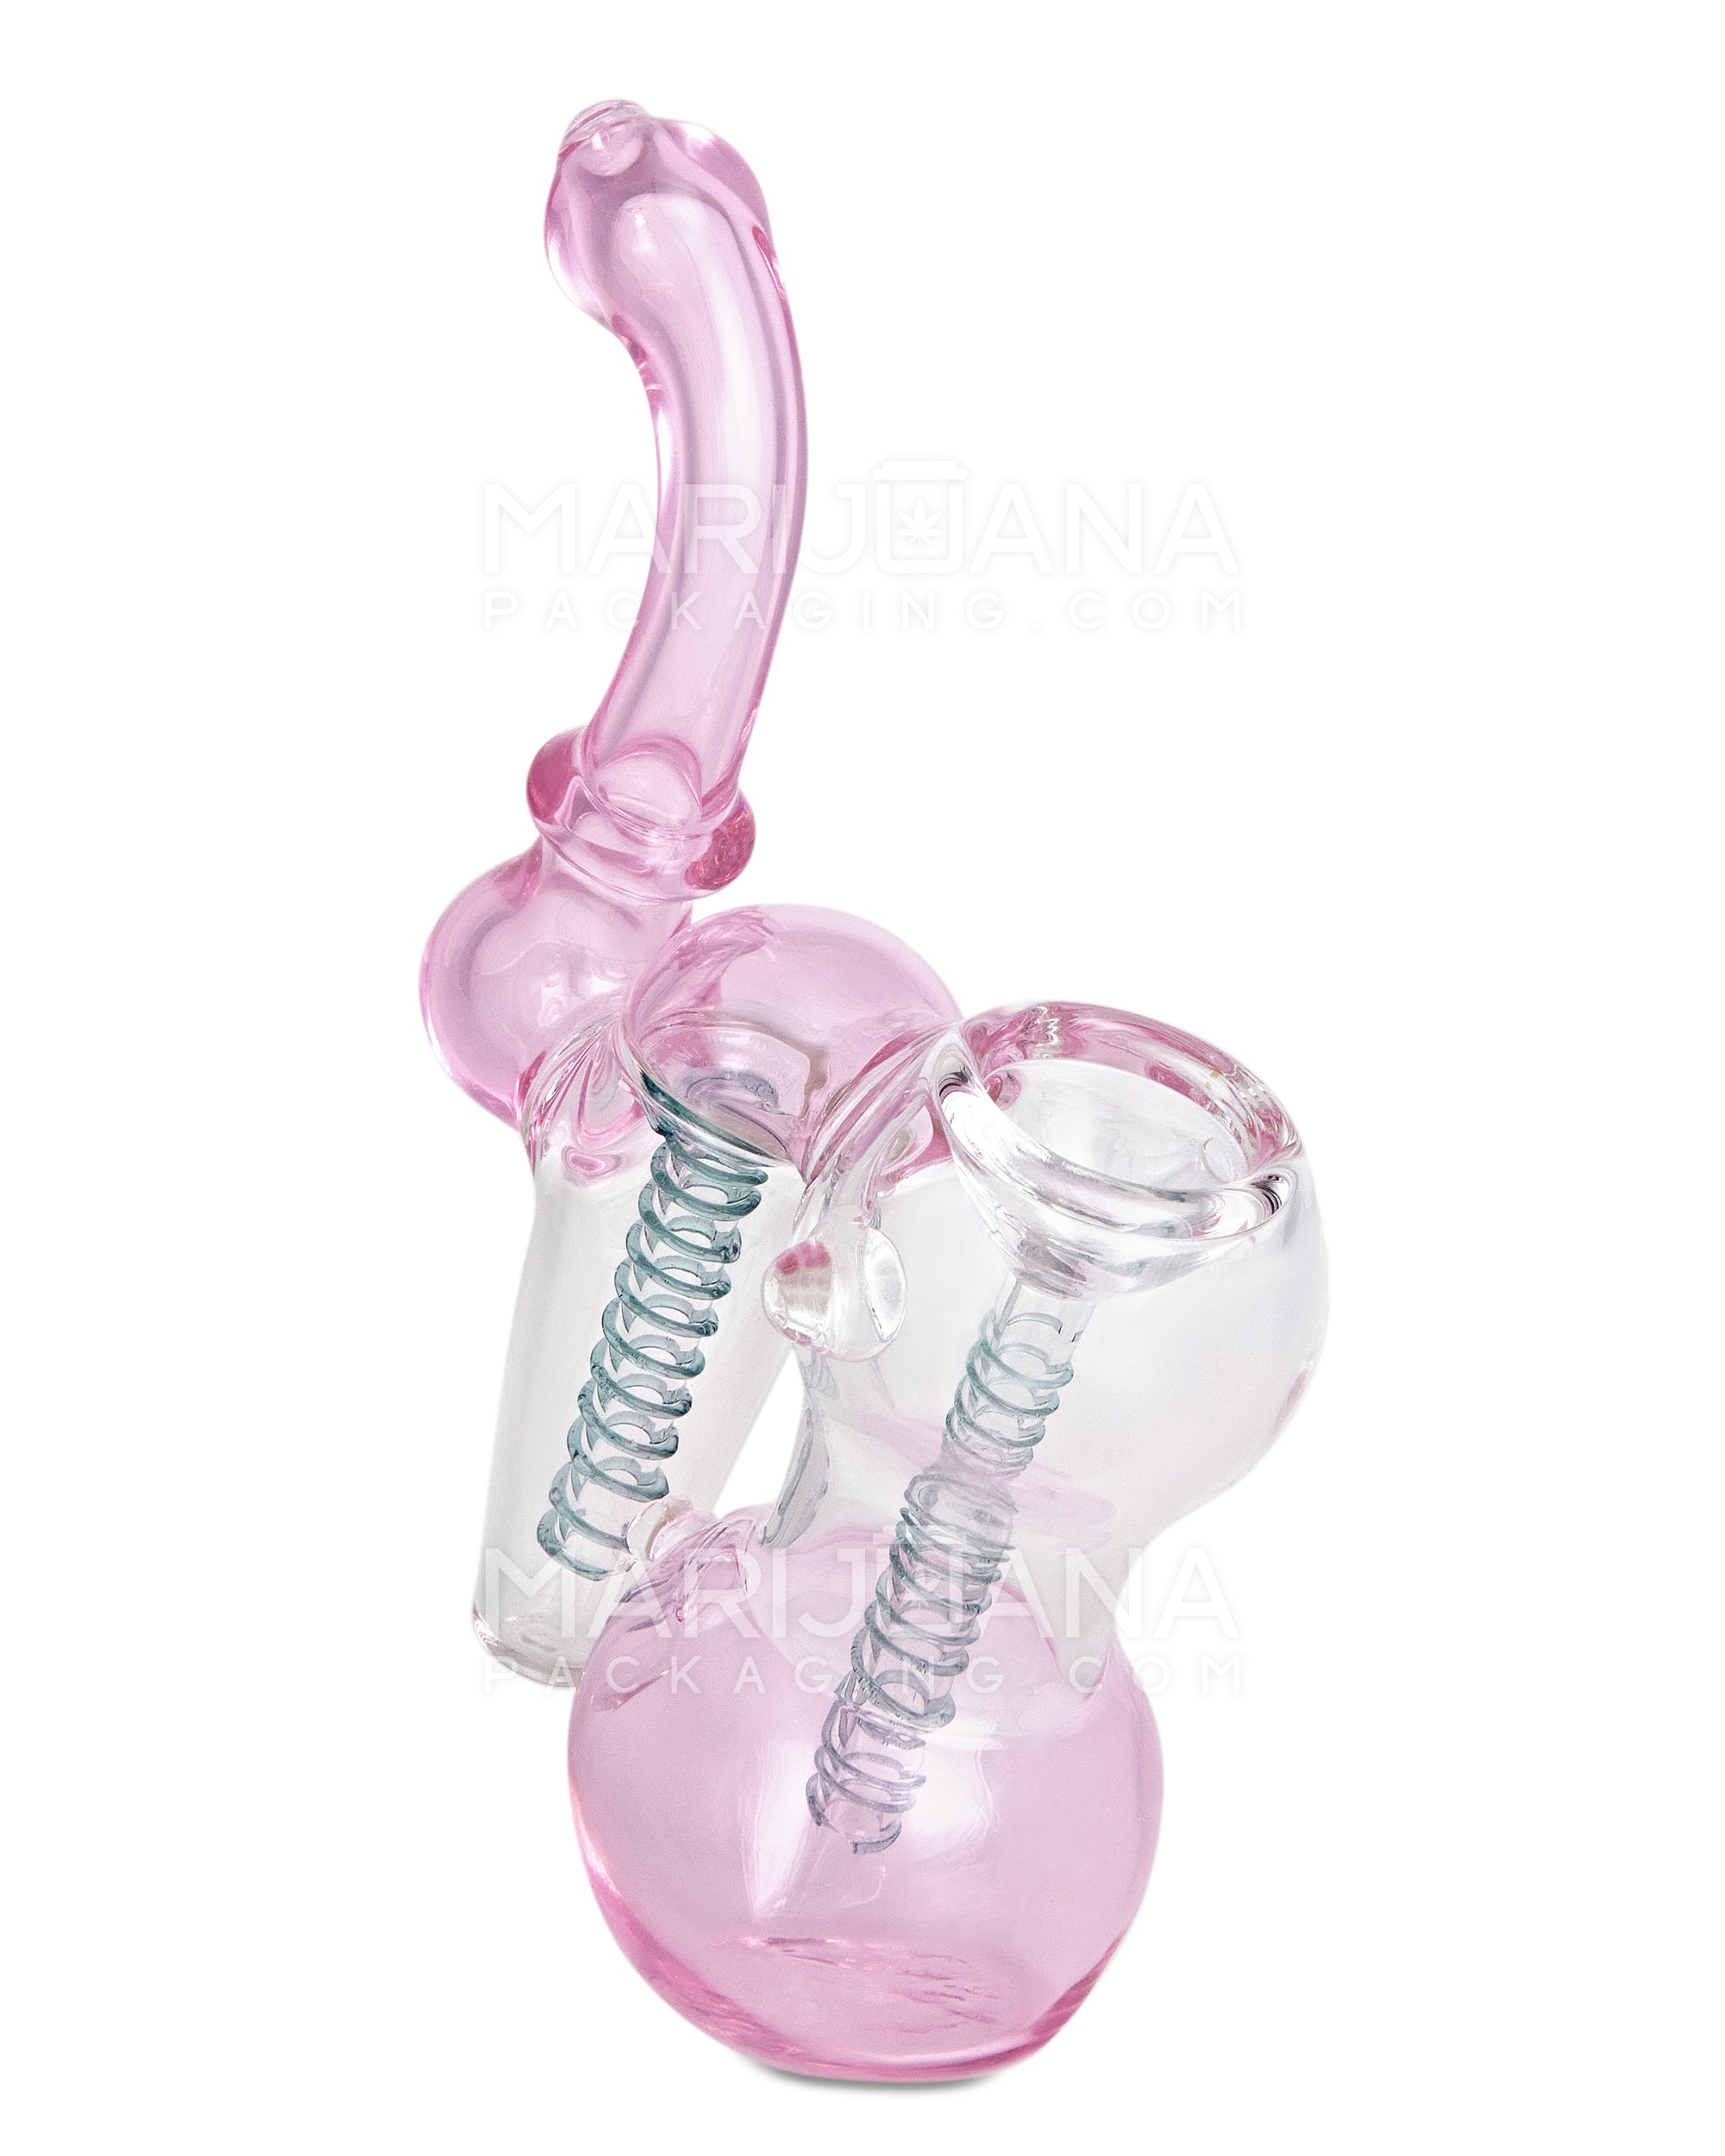 Ringed Double Chamber Bubbler w/ Multi Knockers | 7.5in Tall - Glass - Pink - 4